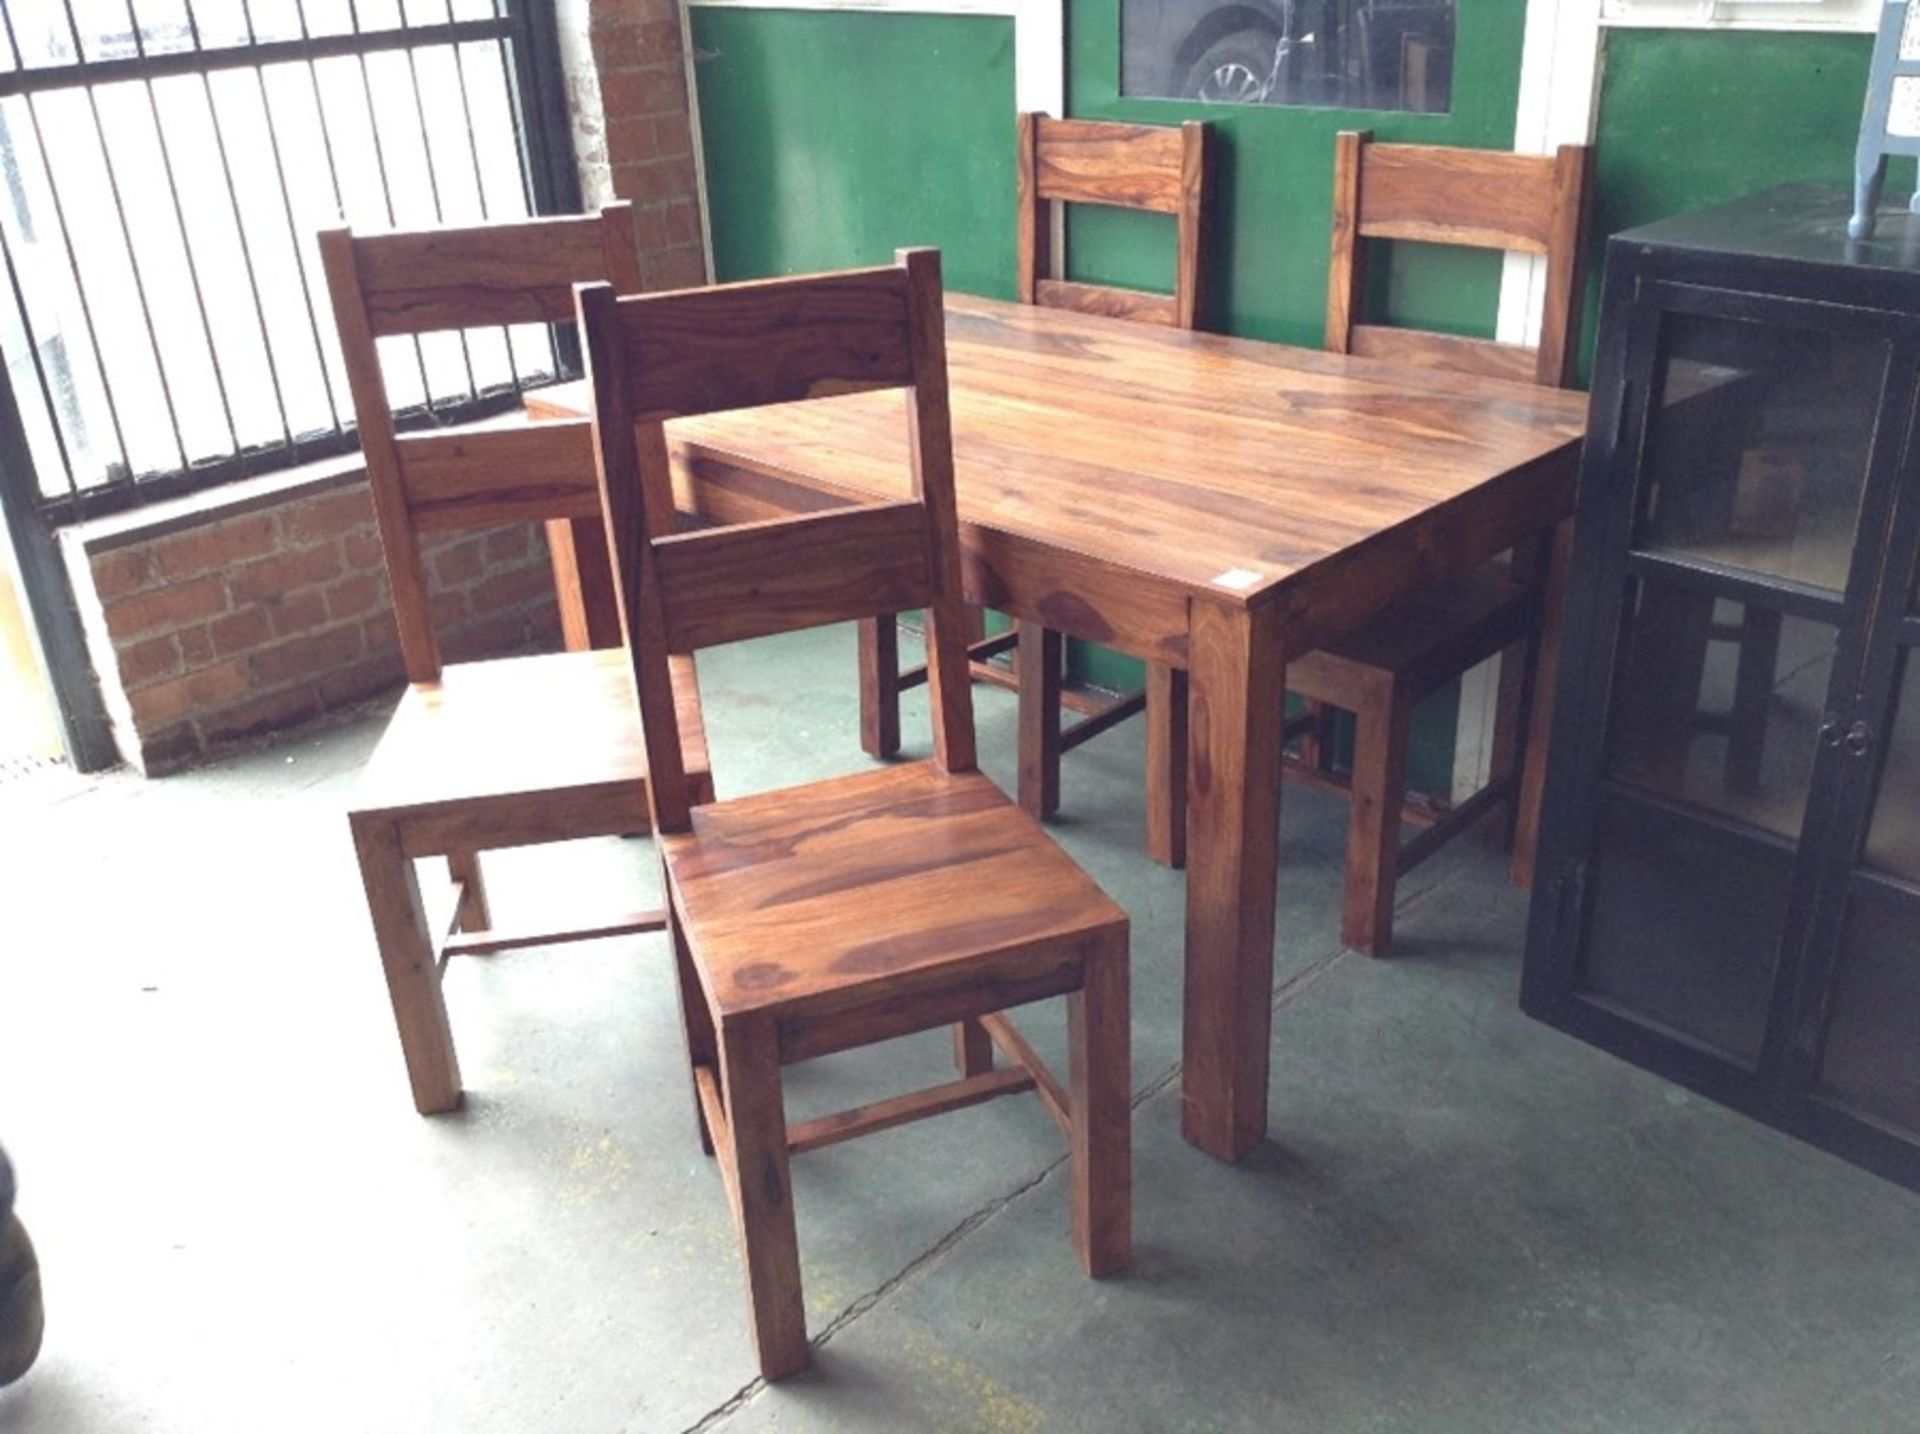 ETHNIC TABLE VAND 4 X CHAIRS (B147)